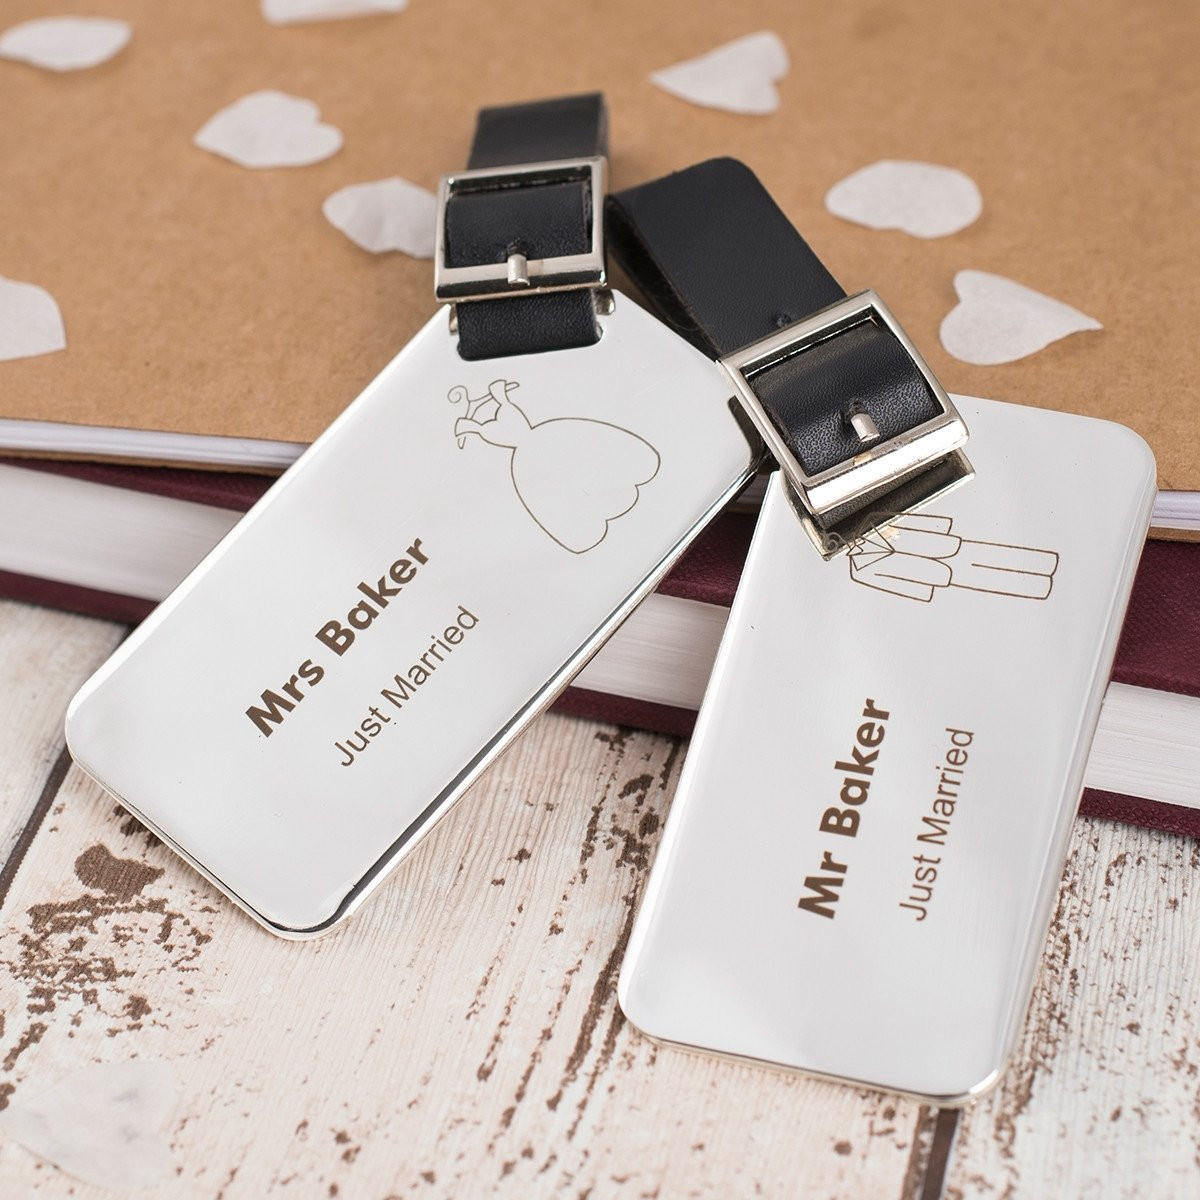 Wedding Gift Ideas For Couple Who Have Everything
 10 Trendy Gift Ideas For Couples Who Have Everything 2020